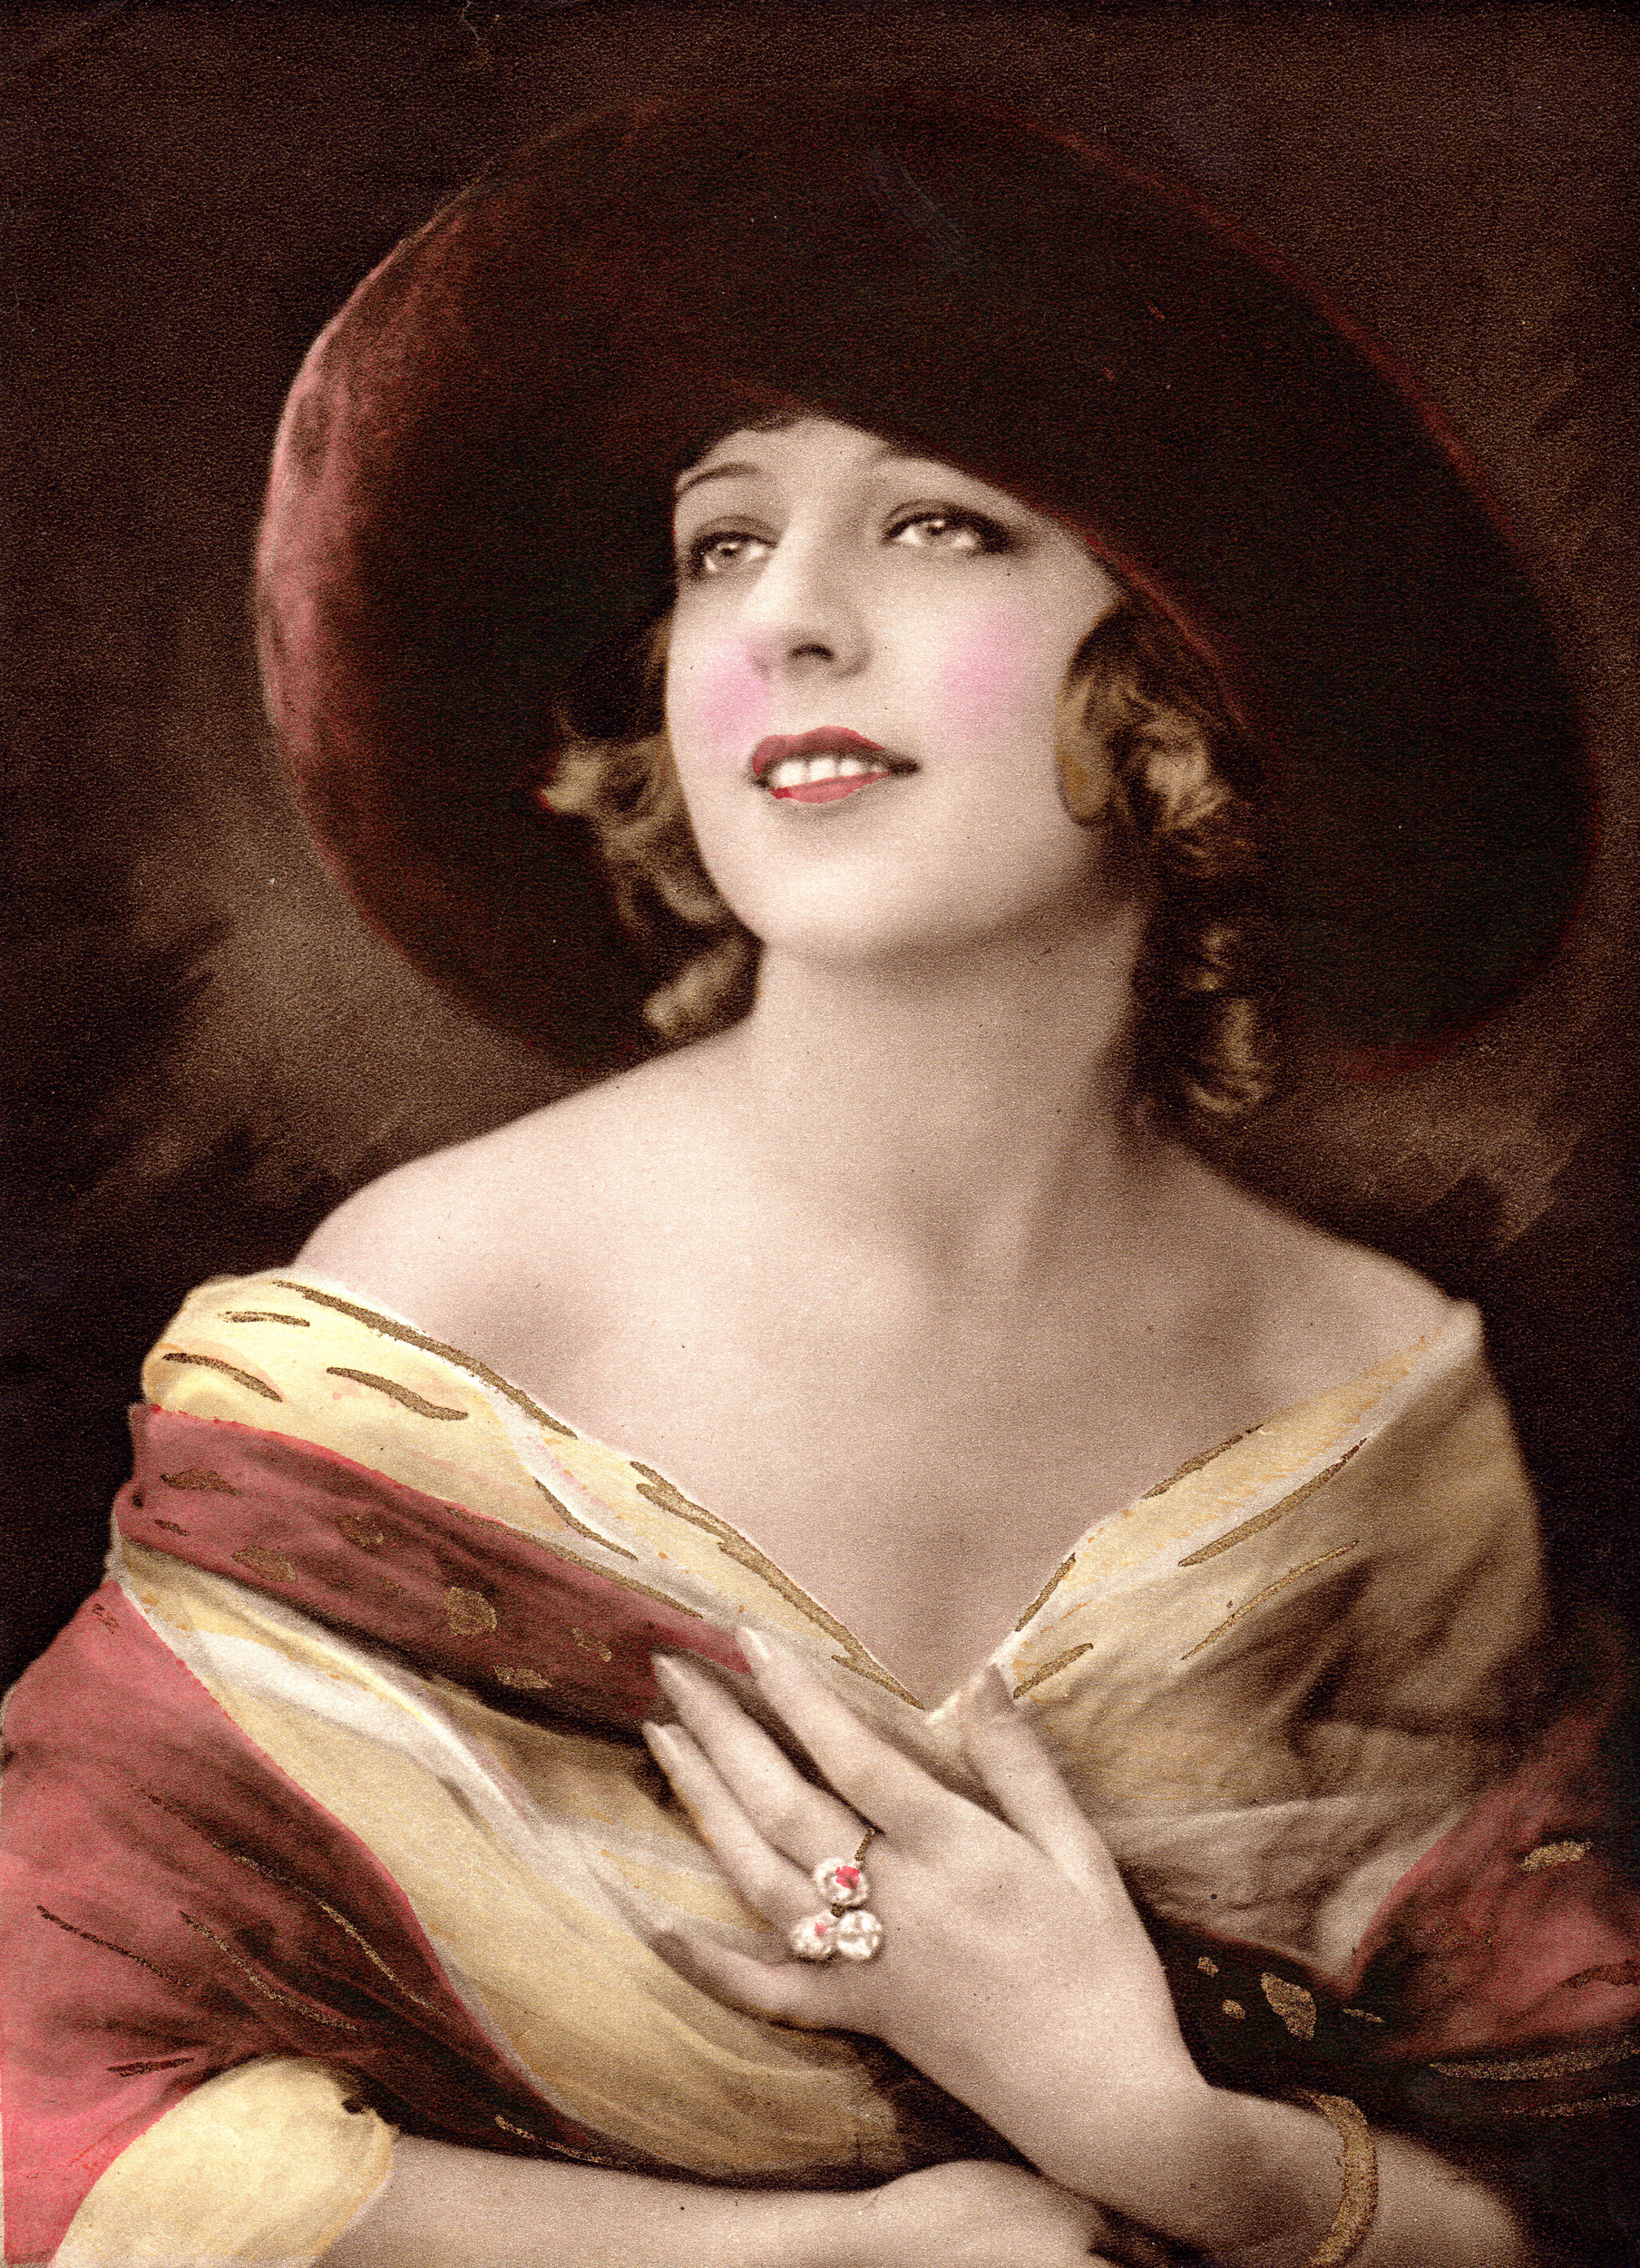 Hand-colored German photogravure portraits from the early 20th century